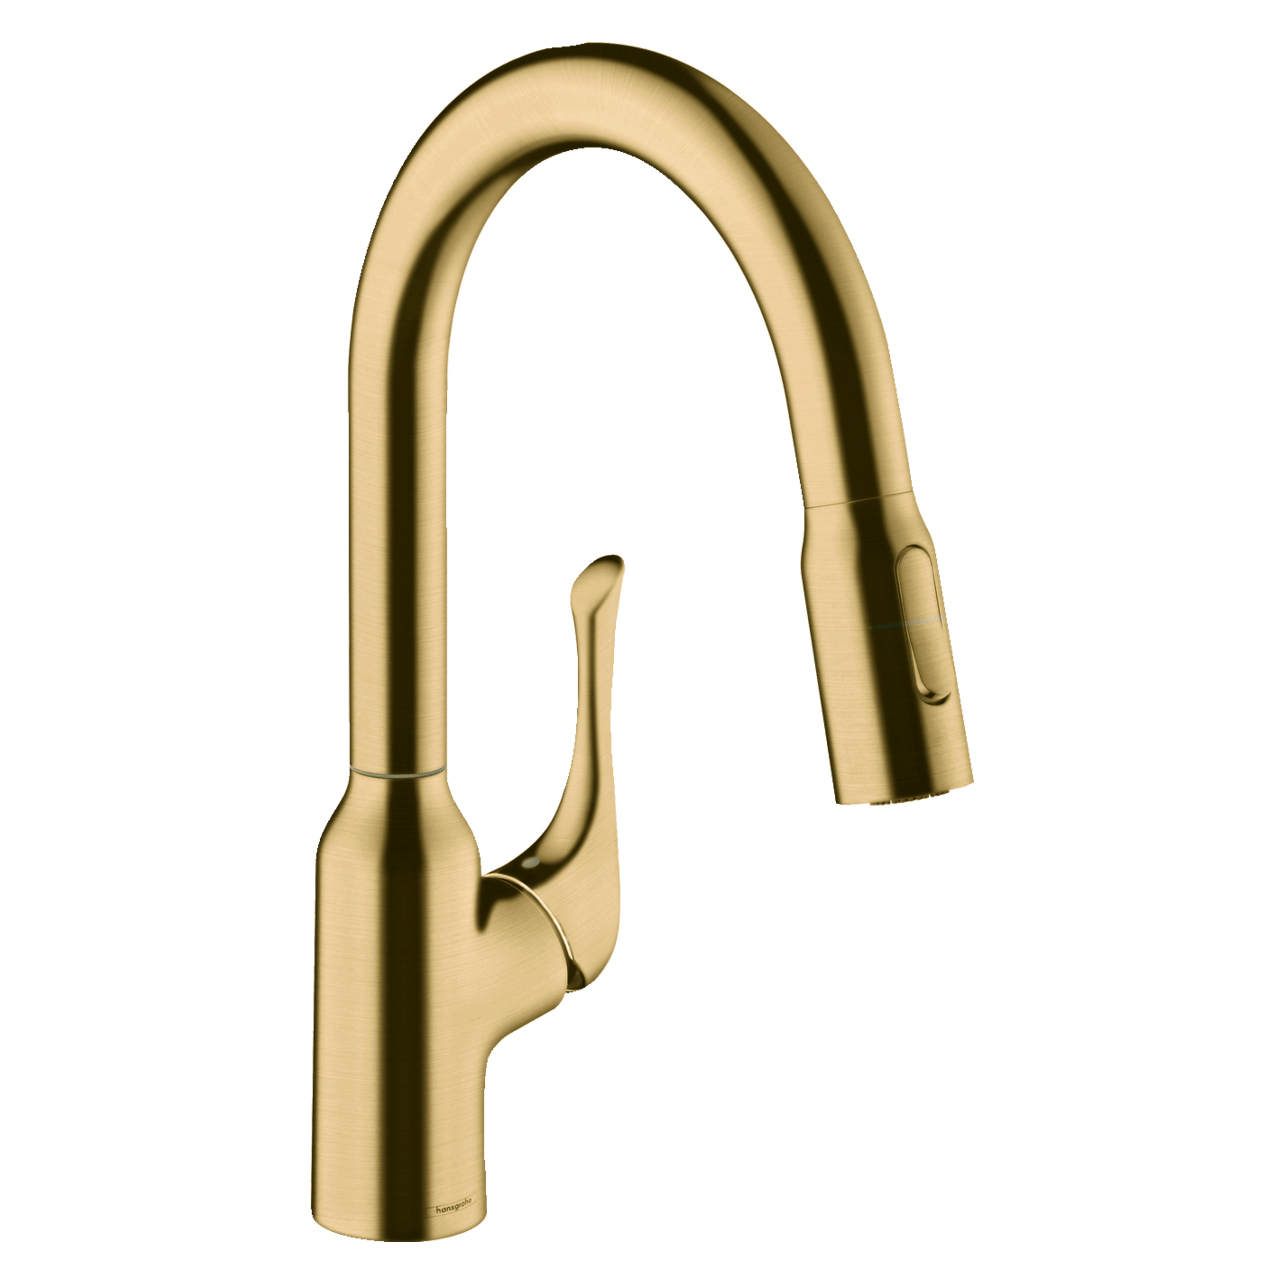 Allegro N Pull-Down Prep Kitchen Faucet in Brush Gold Optic